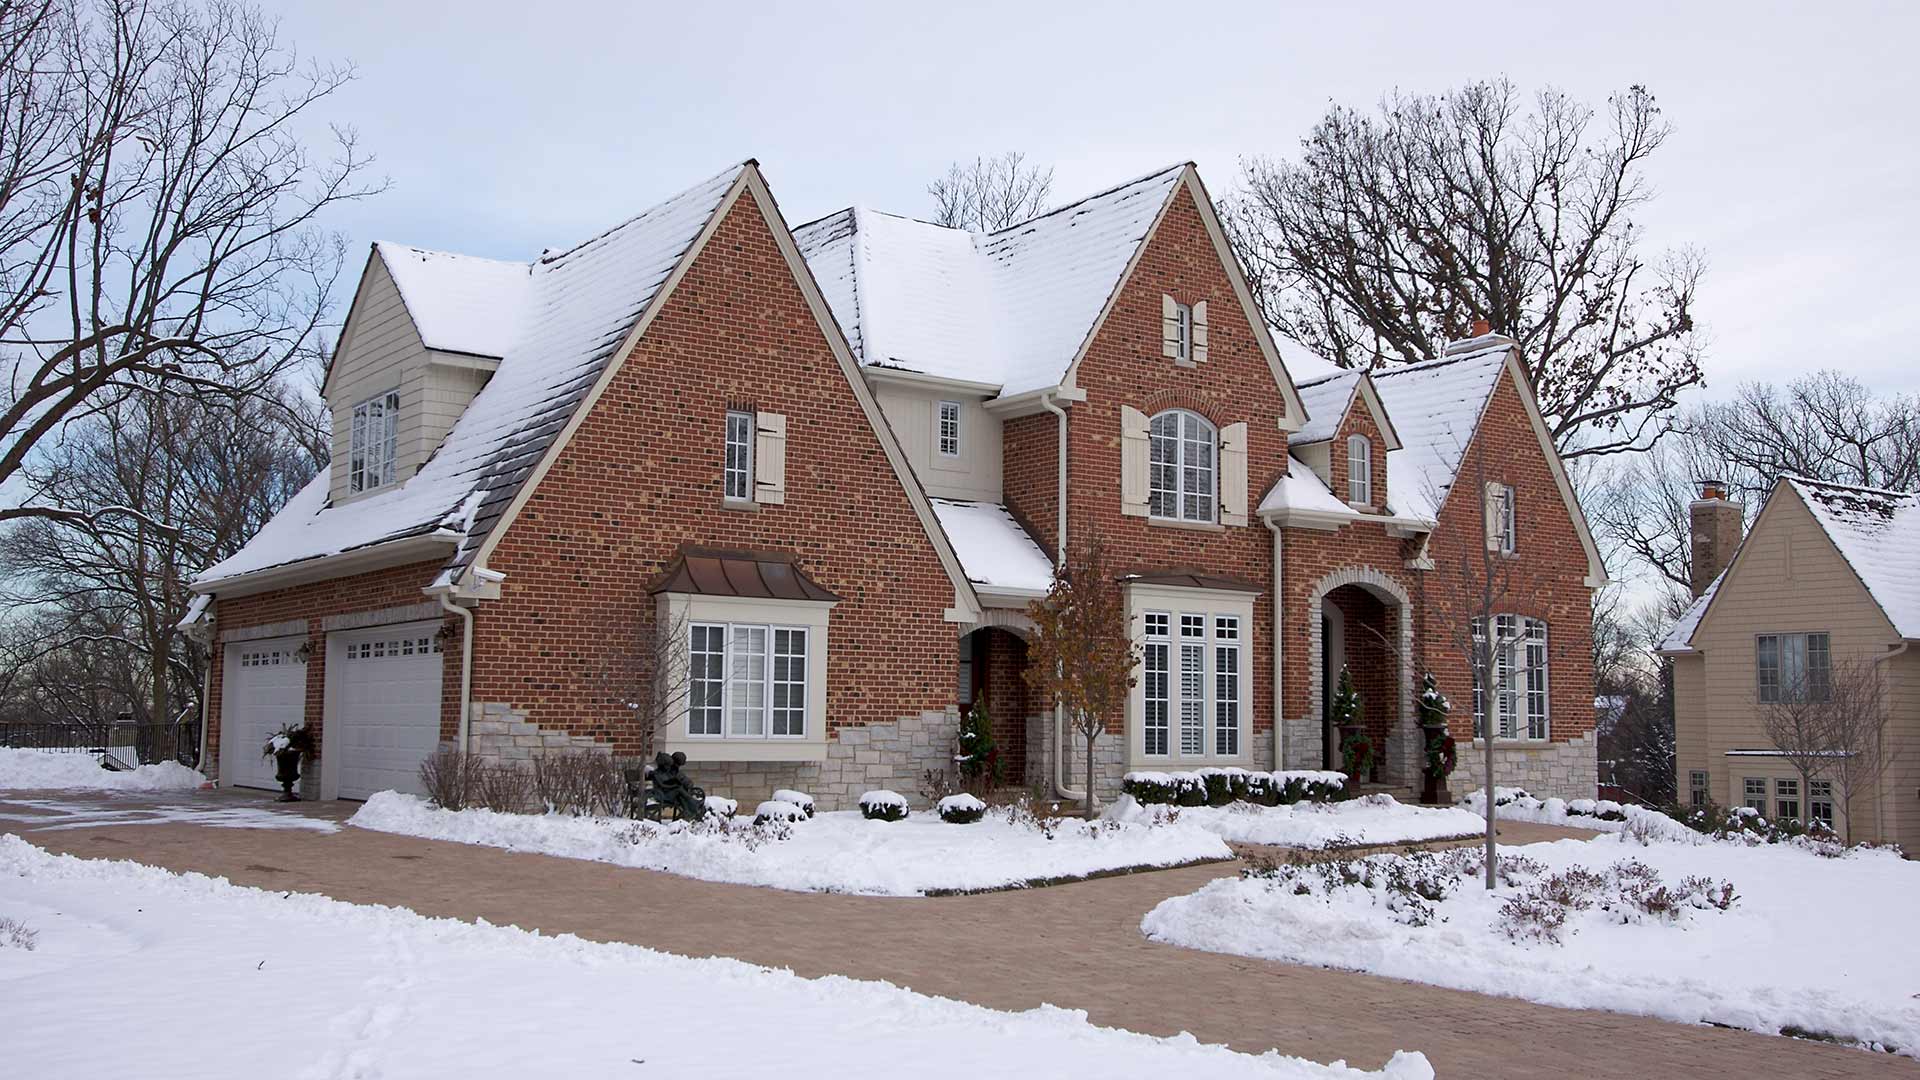 Homeowners - Stop Shoveling Your Own Snow! Hire Pros